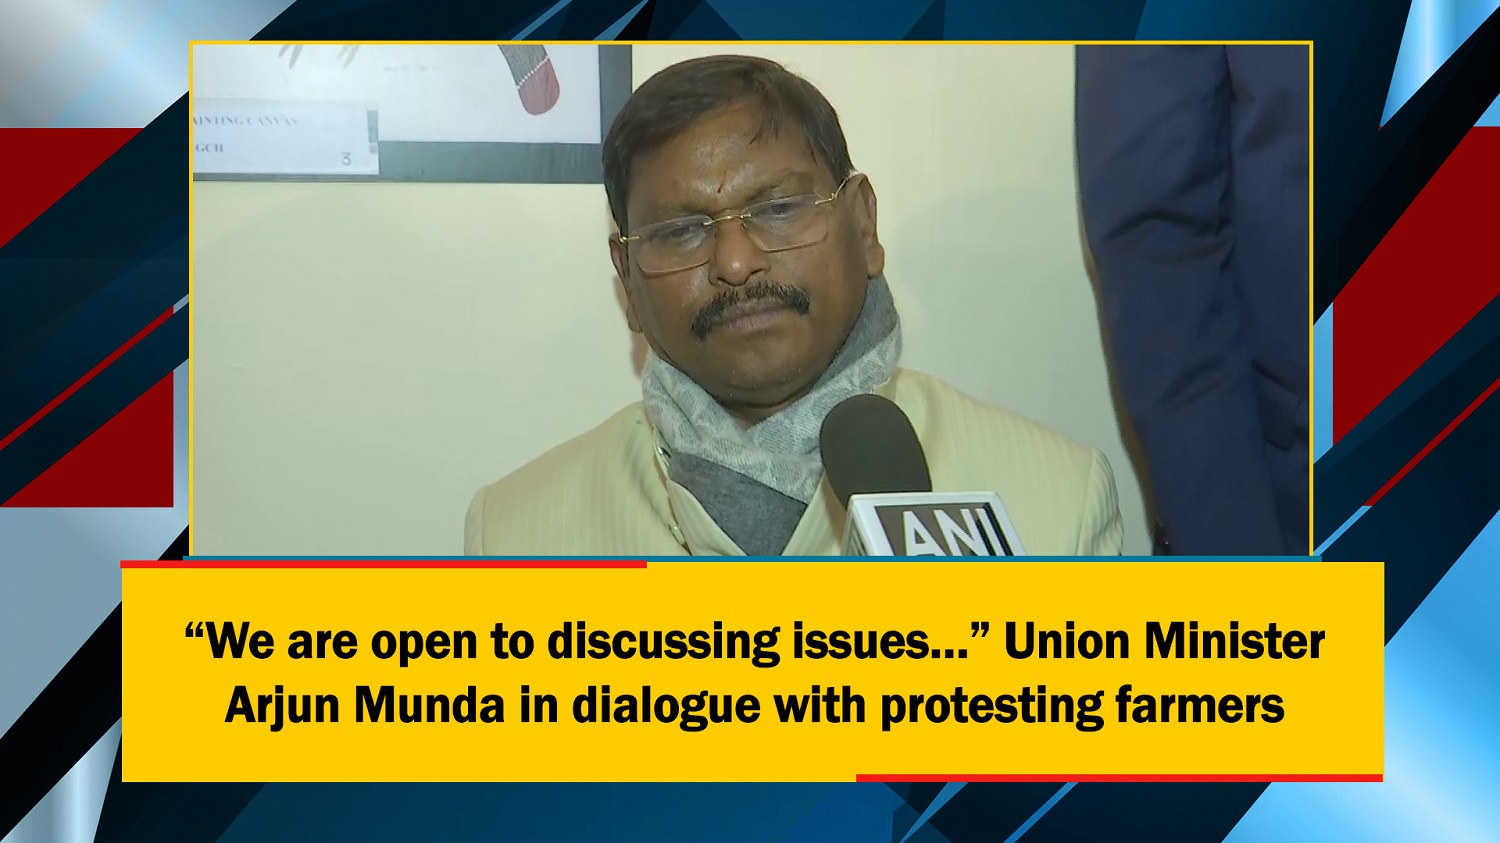 We are open to discussing issues~Union Minister Arjun Munda in dialogue with protesting farmers